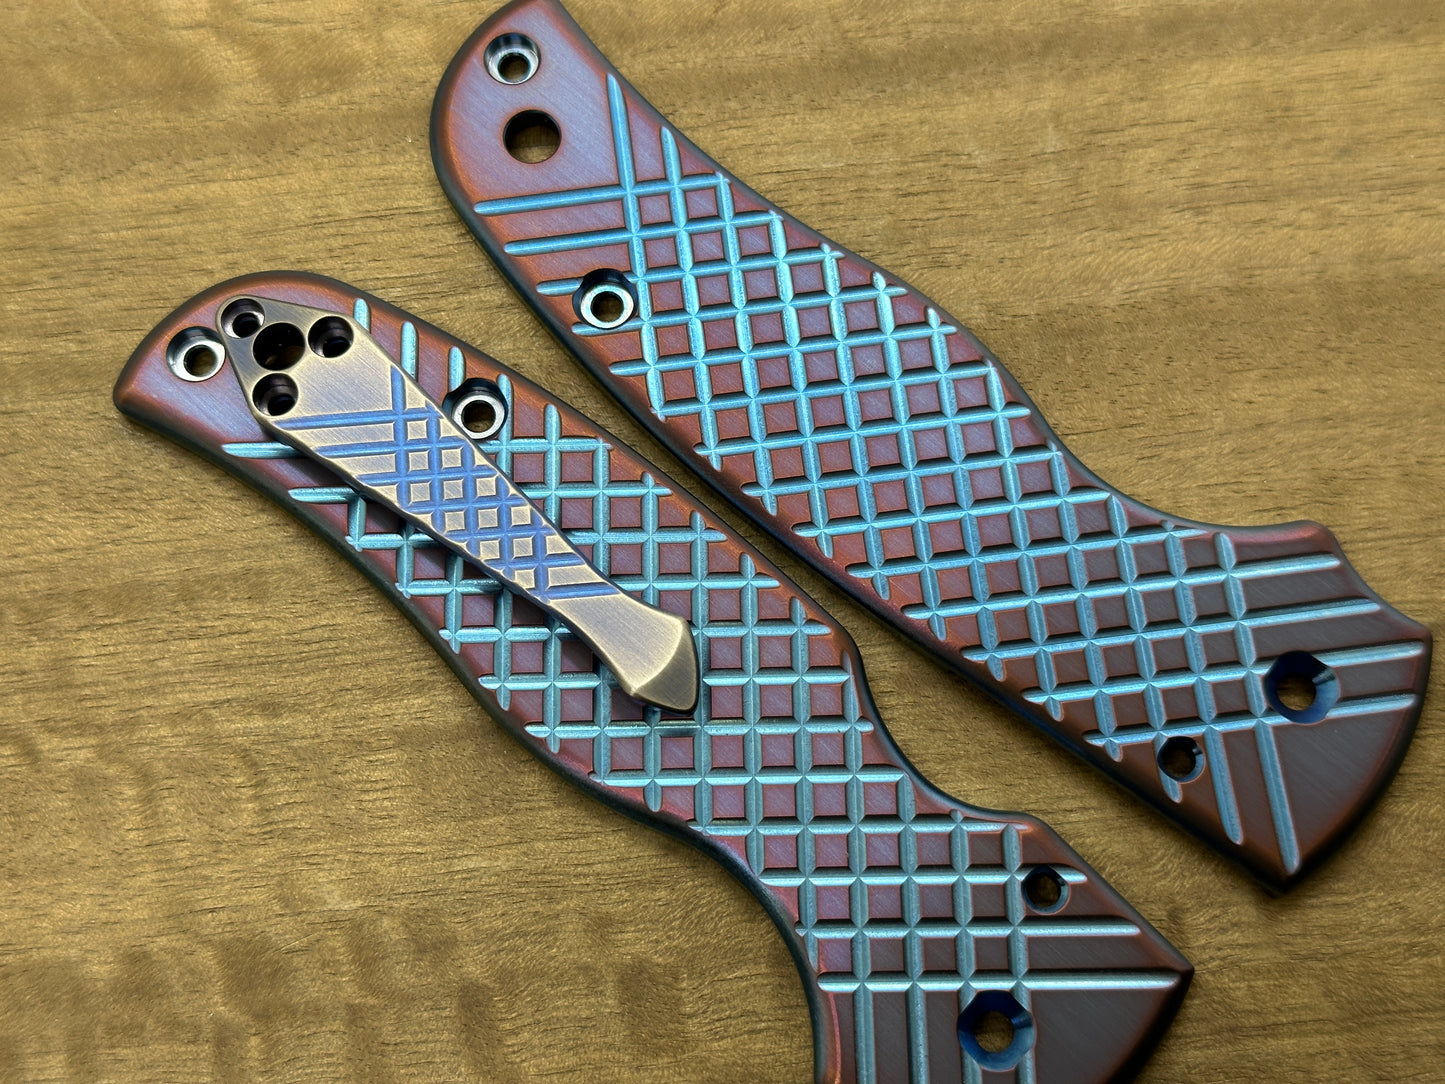 2-Tone BLUE ano & Brushed FRAG Cnc milled Titanium CLIP for SHAMAN Spyderco